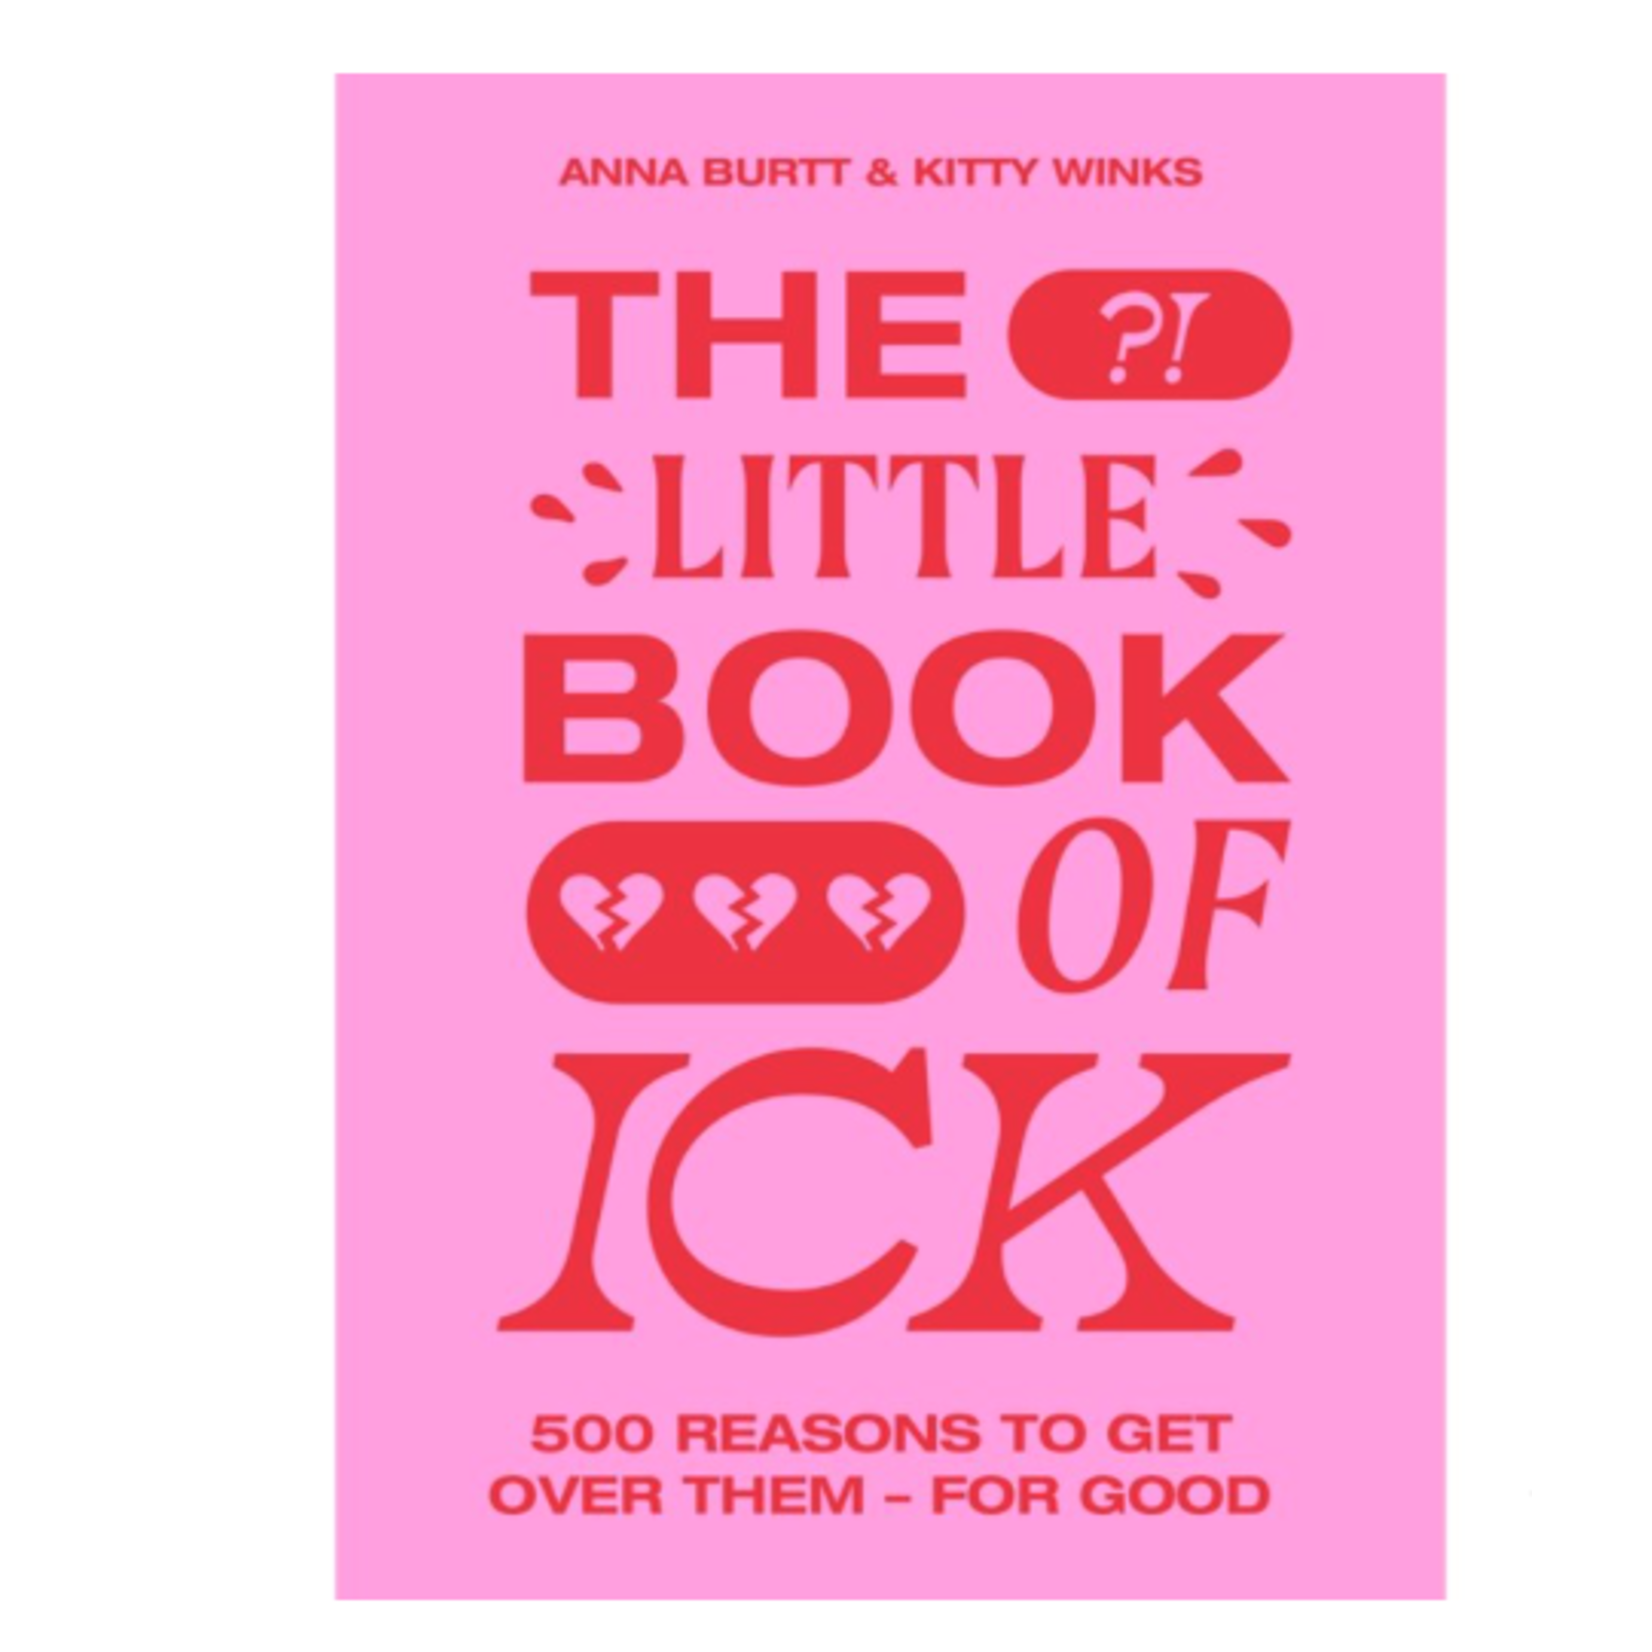 The Little Book of ICK